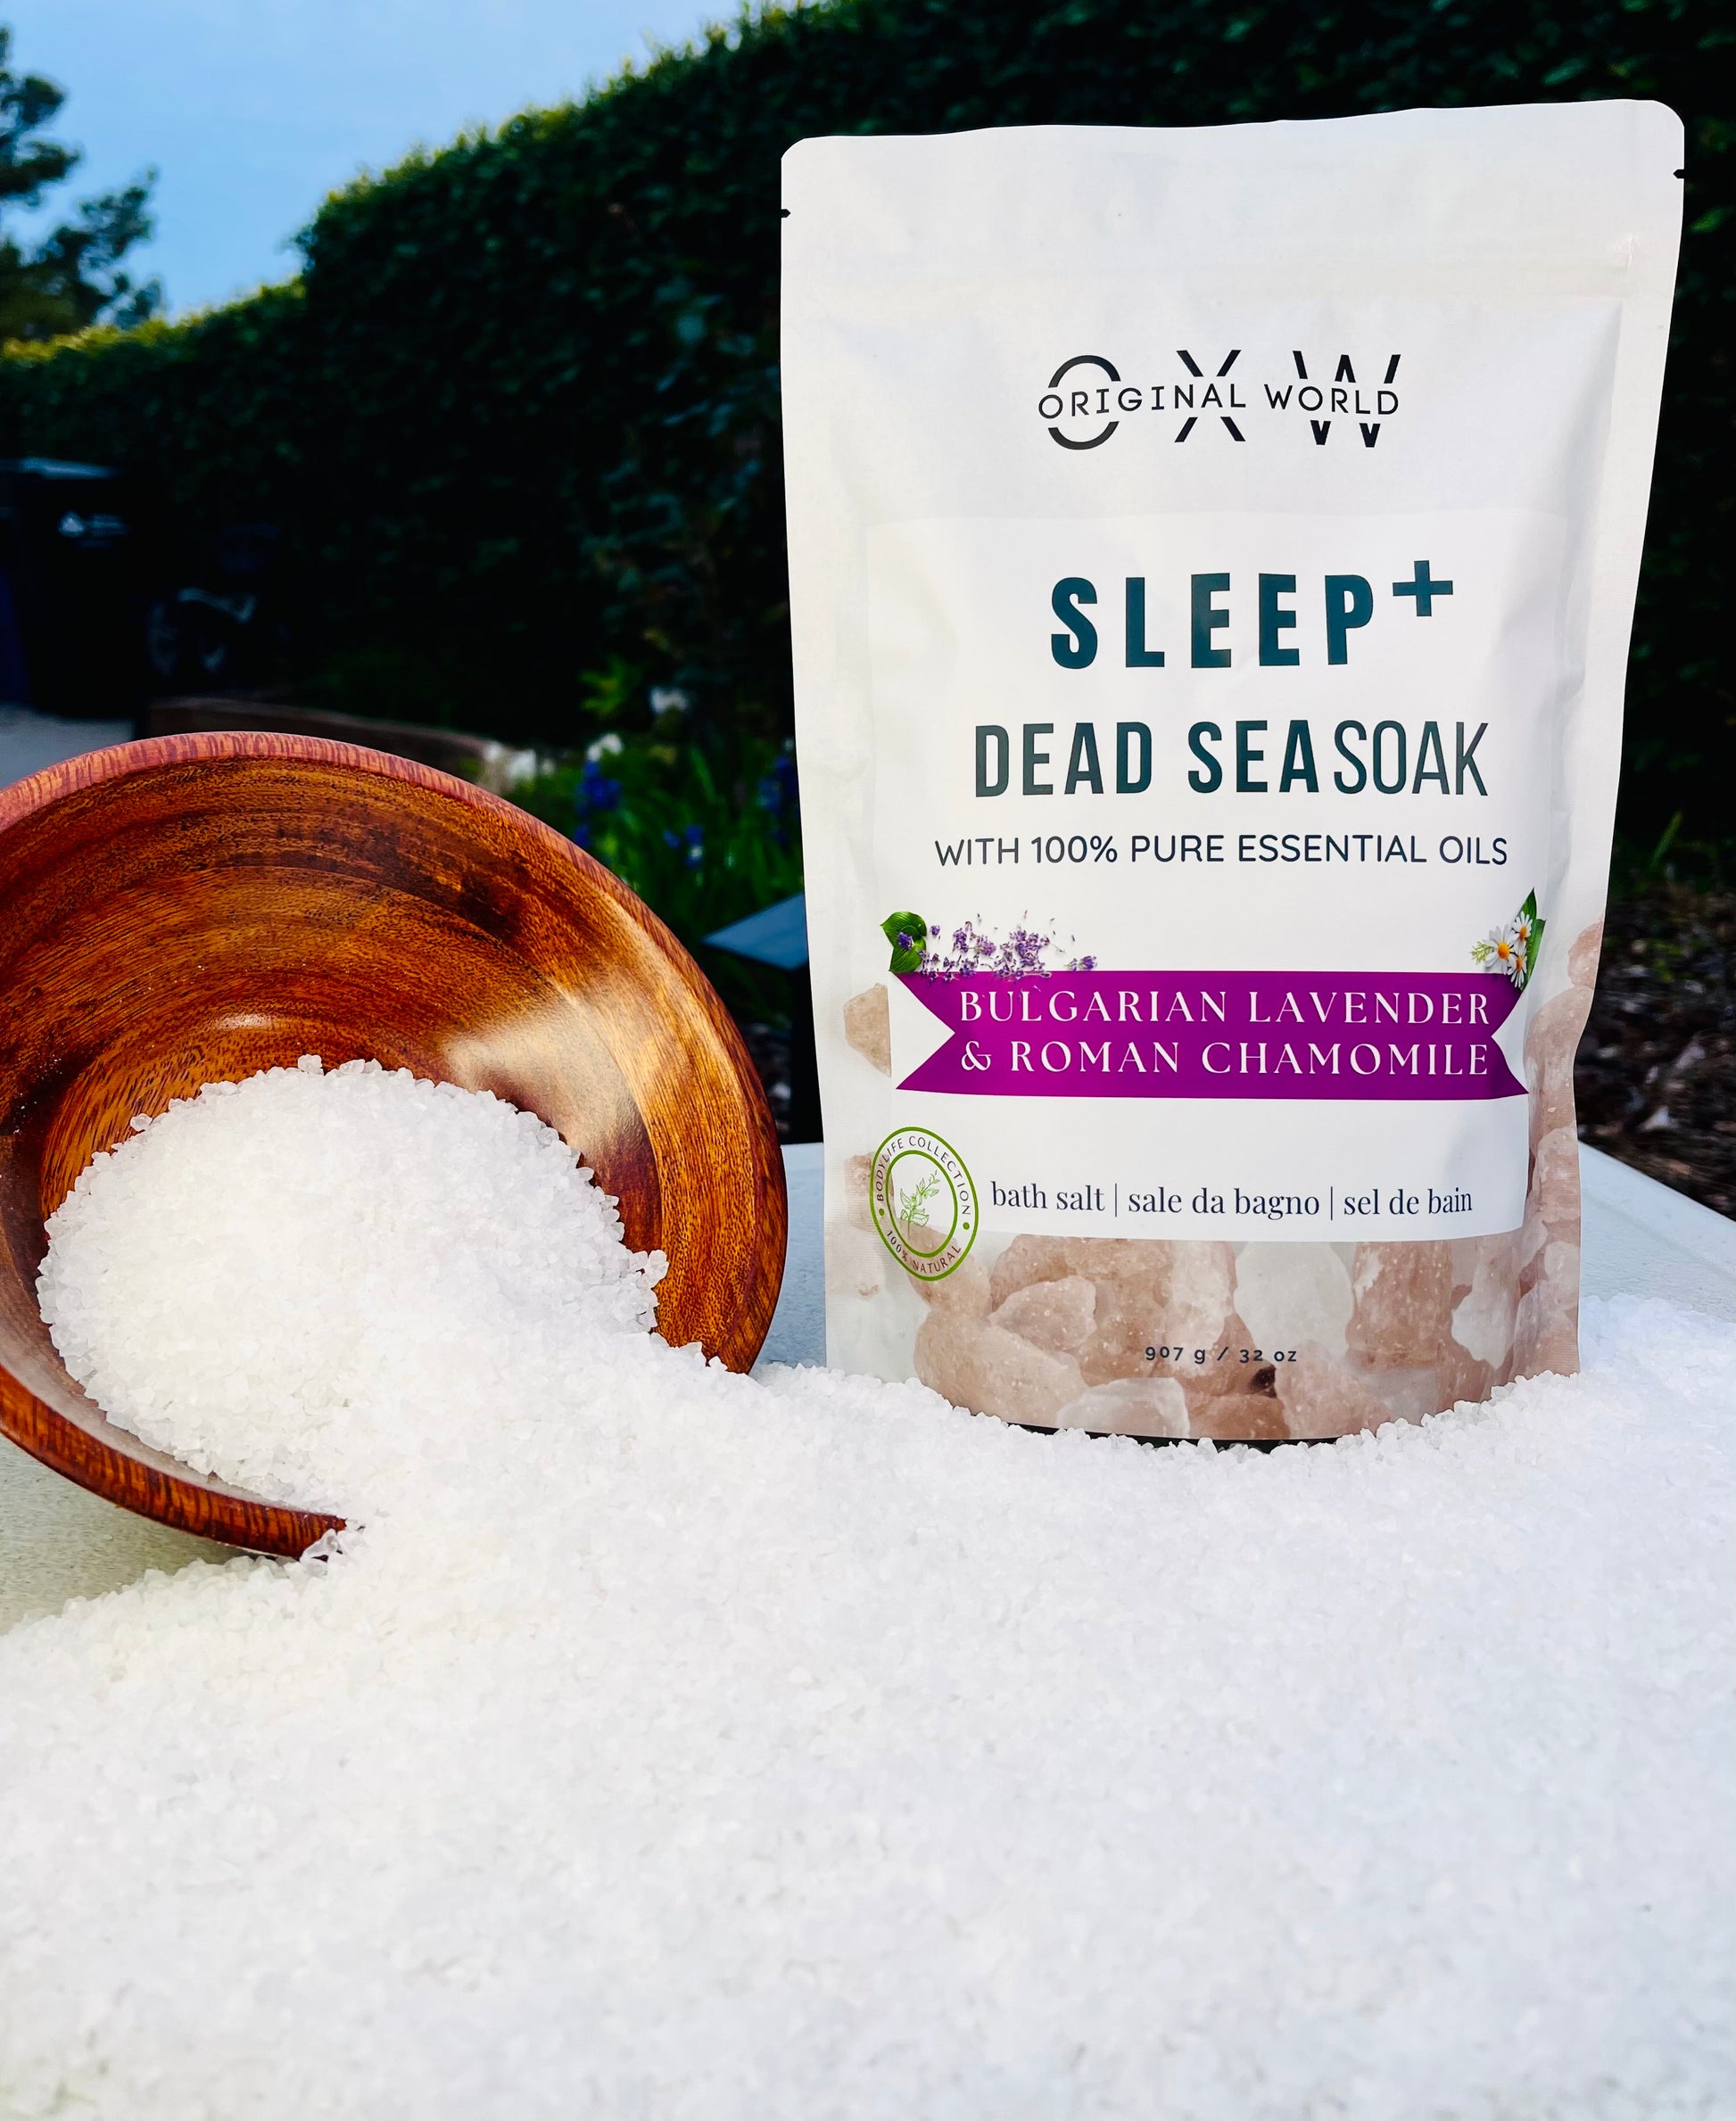 Sleep+ Dead Sea and Epsom Salt Infused with Lavender and Chamomile Essential Oils - OXW Beauty